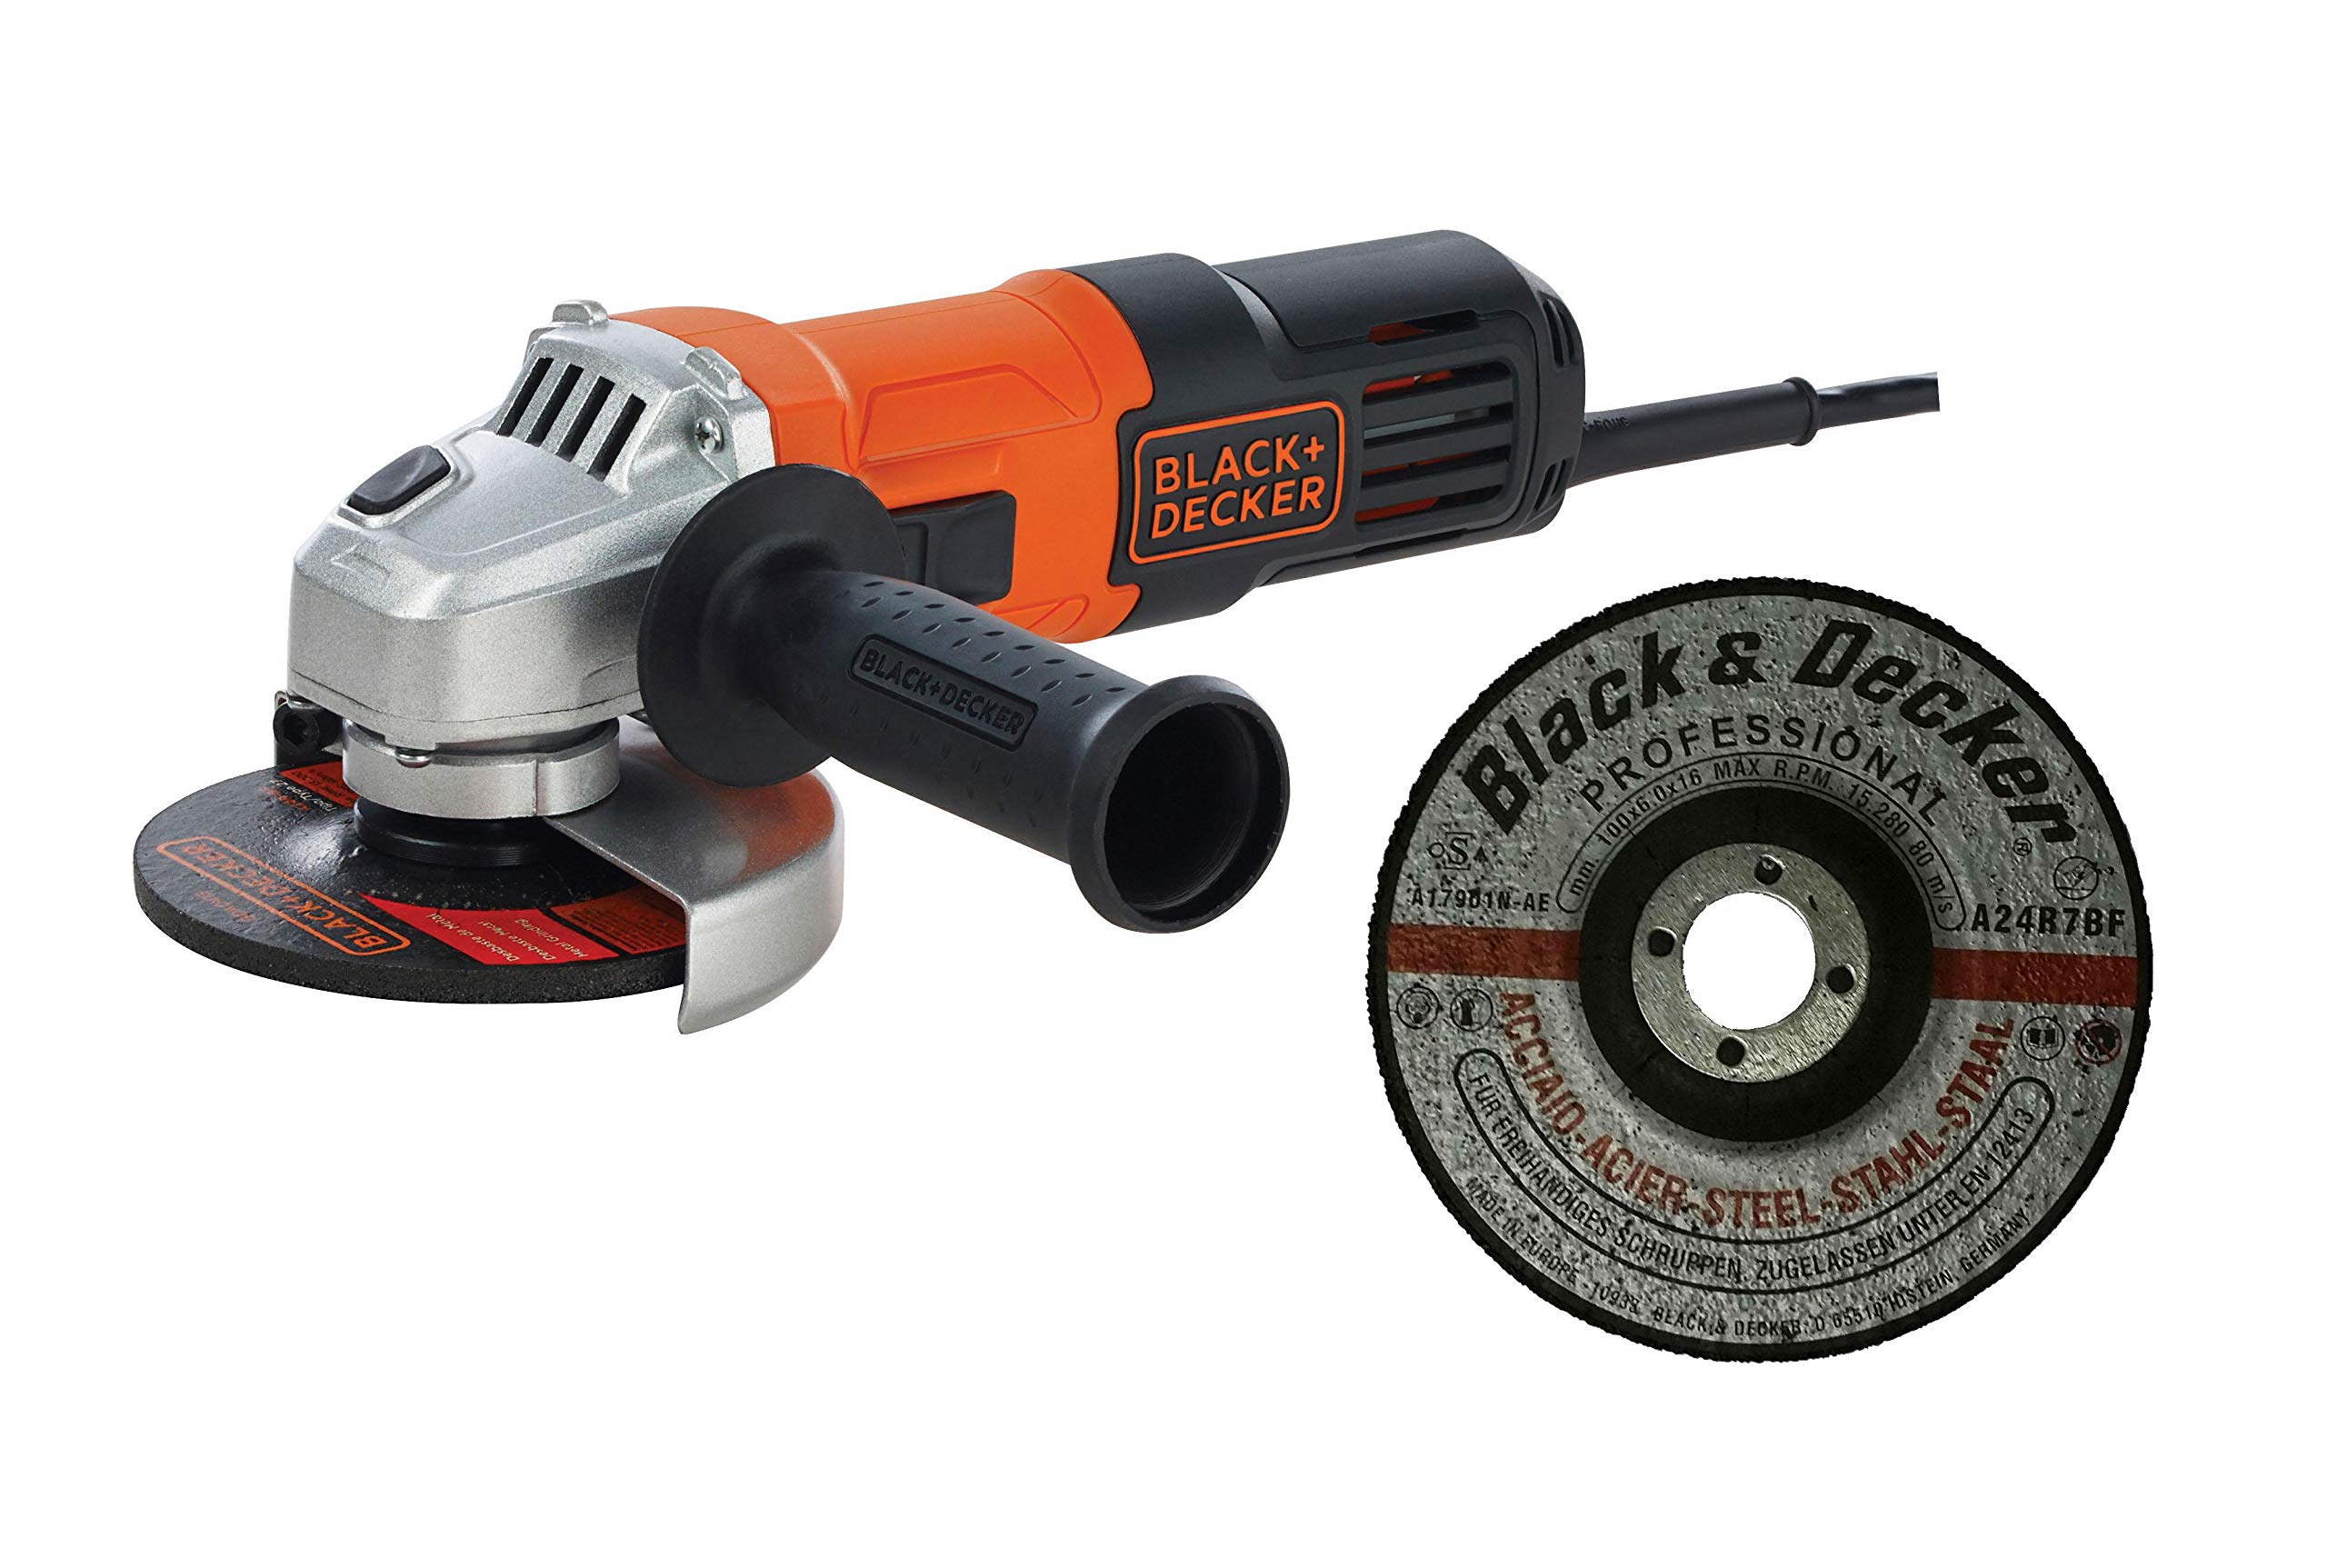 820W Small Angle Grinder with 1 Grinding Disc and 6 Cutting Discs G720P-B5 Orange/Black 115mm